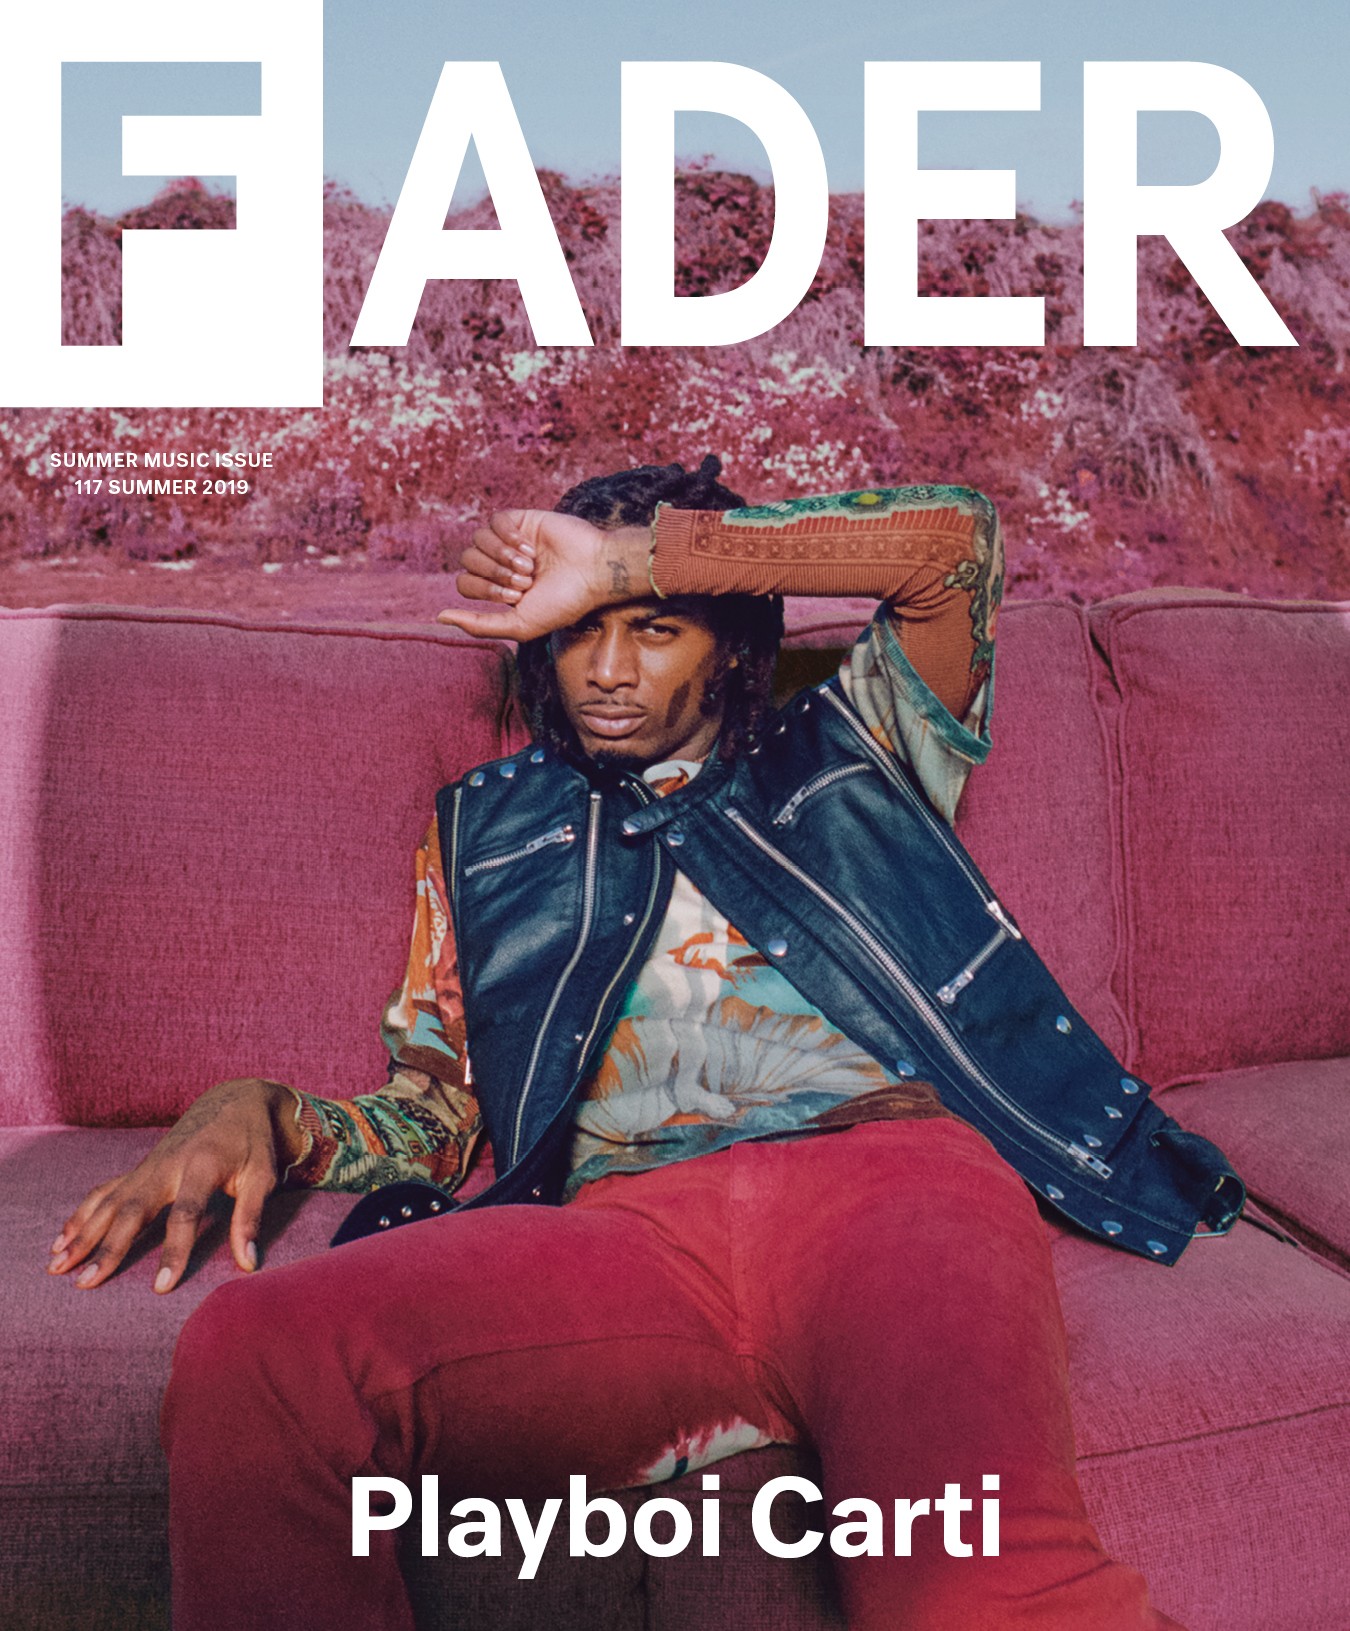 haircut Fraud Removal Cover Story: The Secret Life of Playboi Carti | The FADER